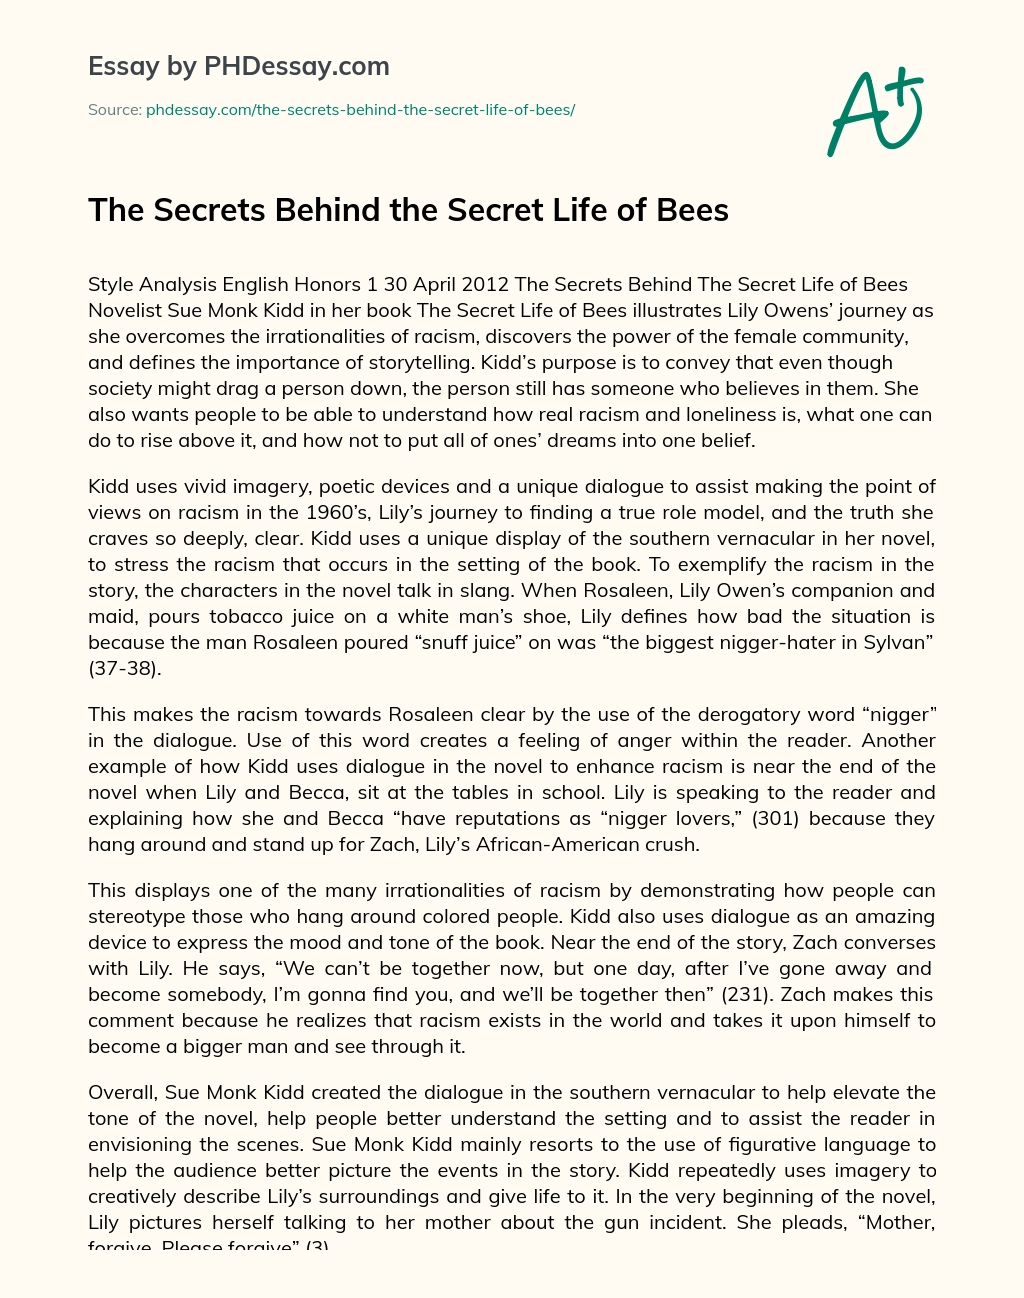 personification in the secret life of bees